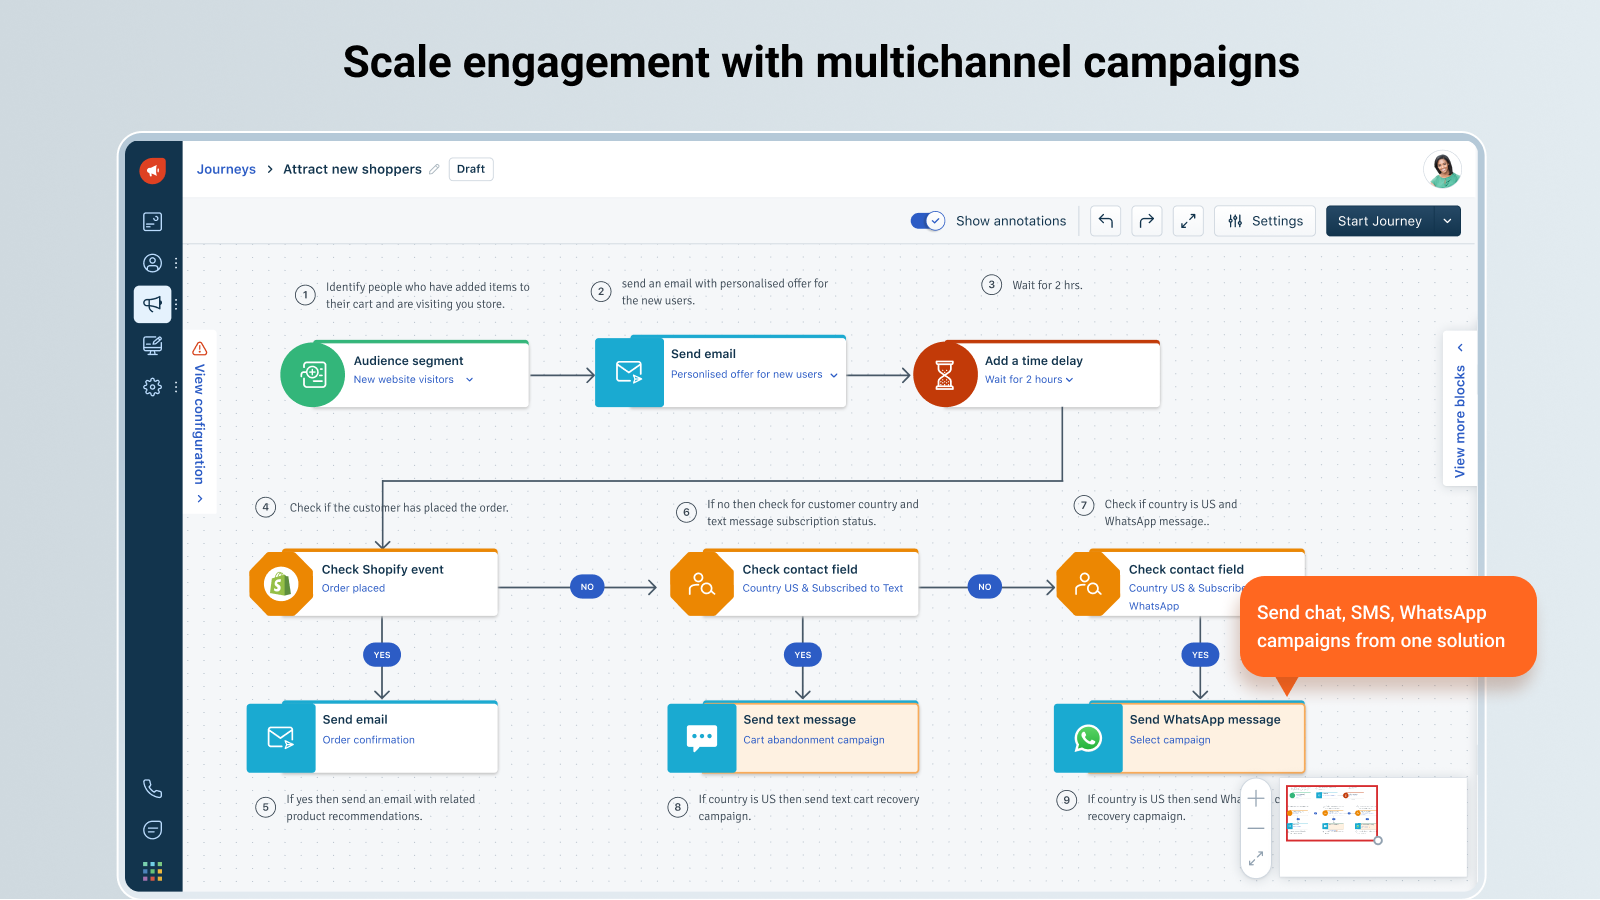 Send SMS, chat, and WhatsApp campaigns